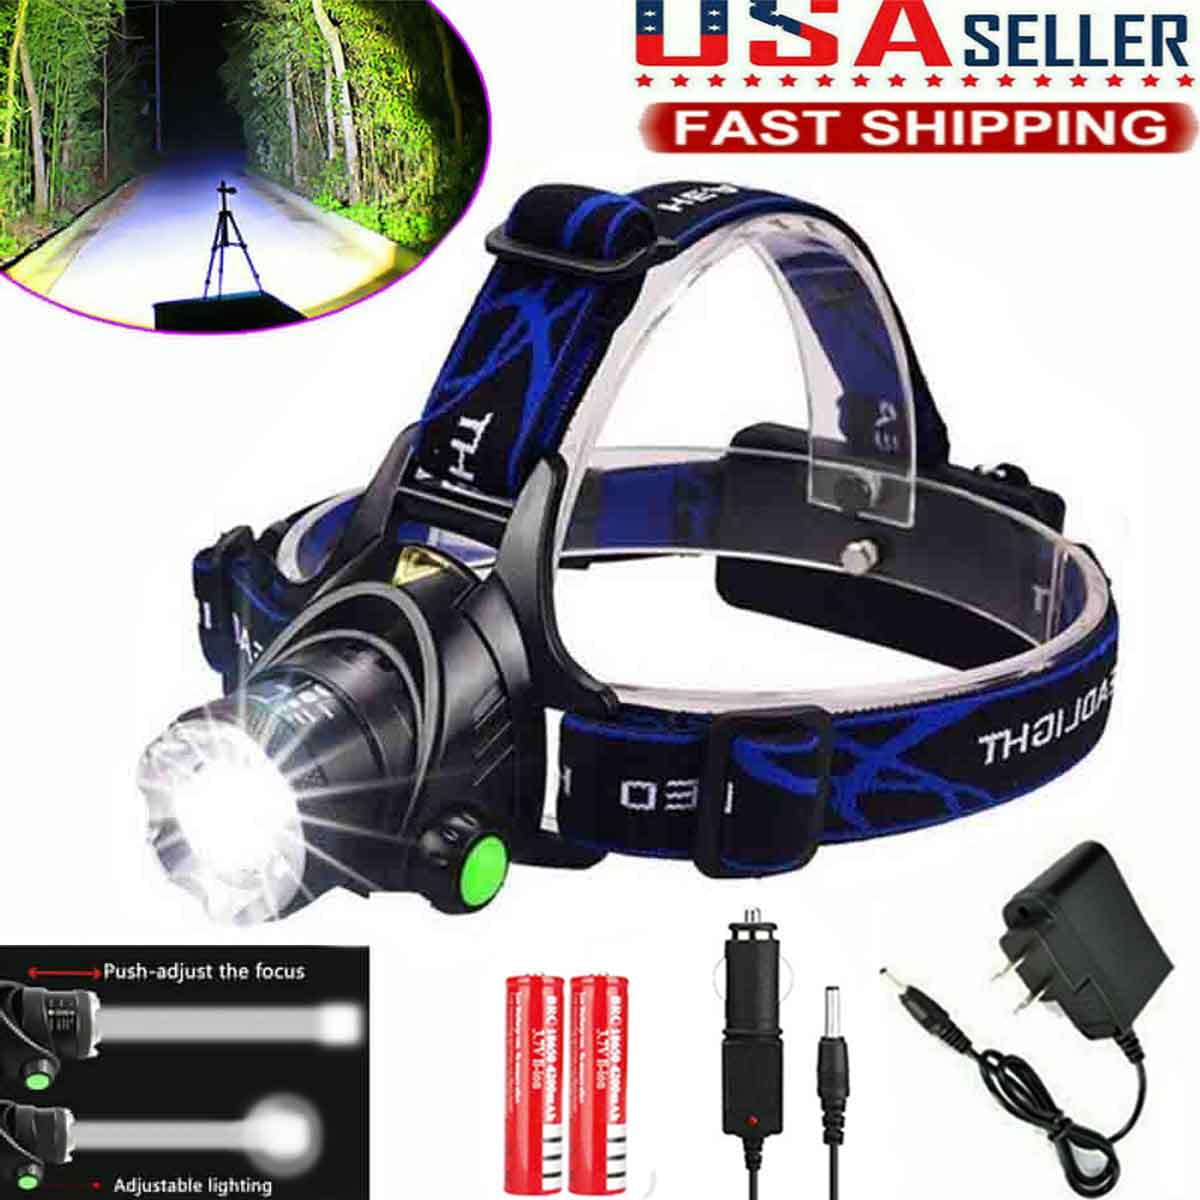 Tactical 900000LM Zoomable Headlamp 18650 T6 LED Headlight Flashlight US Stock 